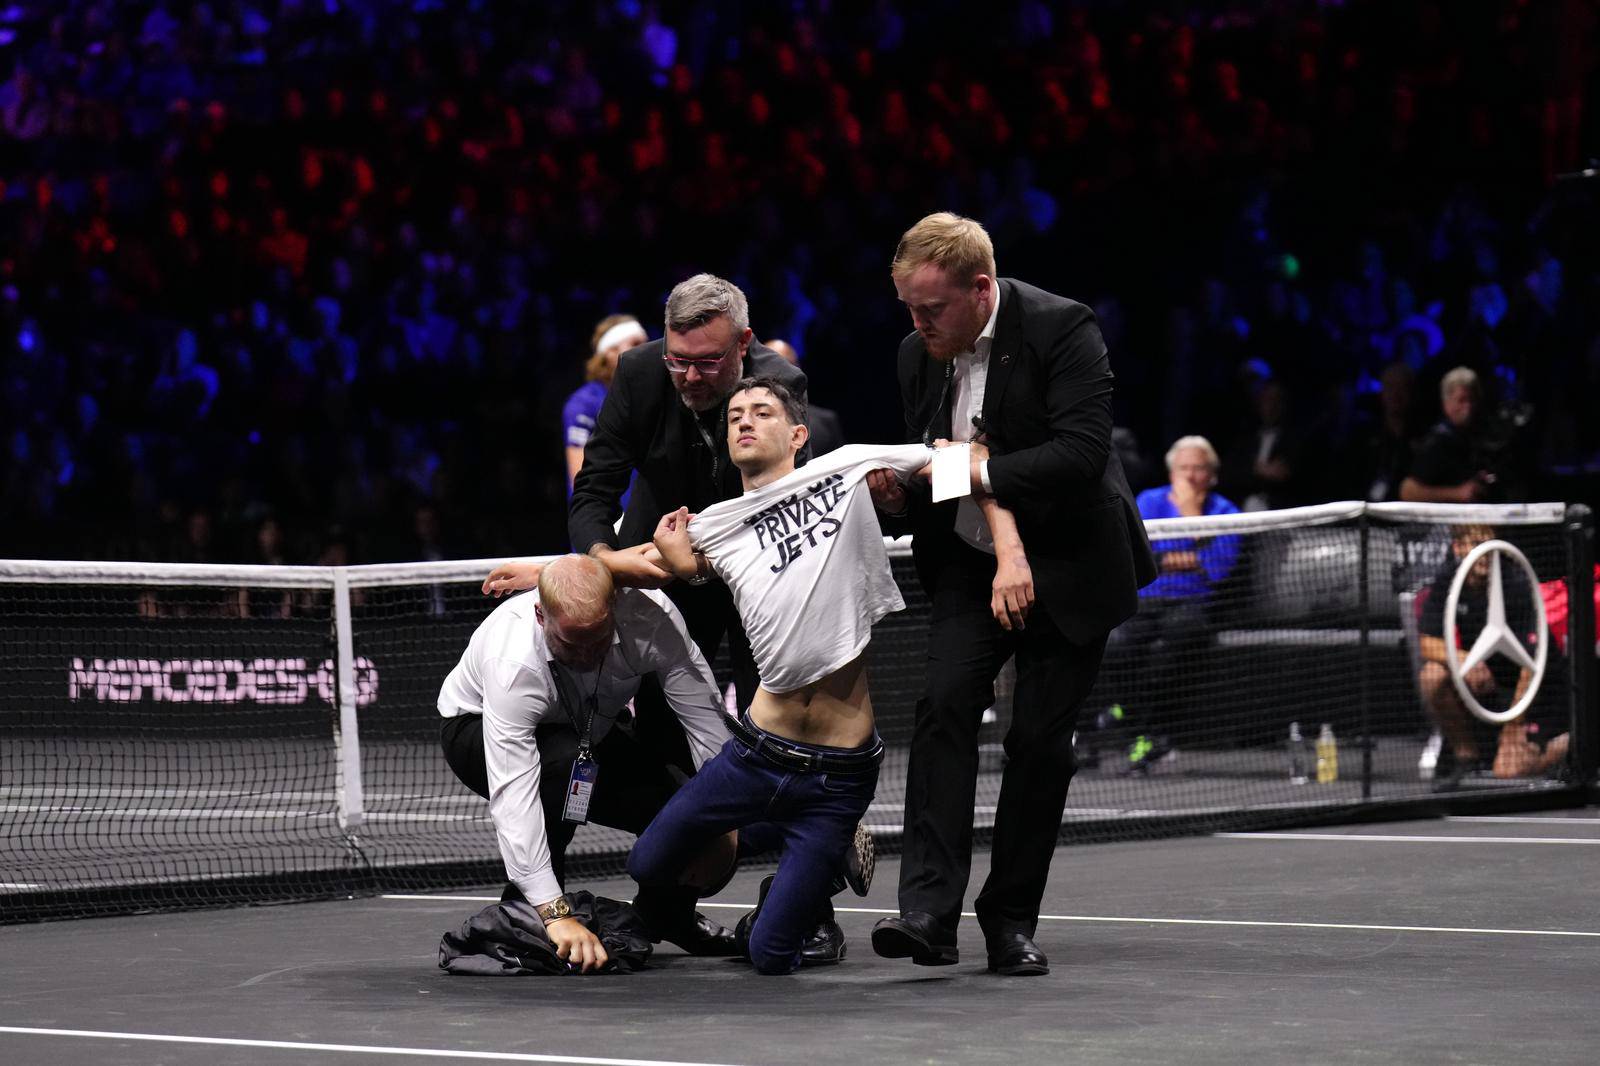 Laver Cup 2022 - Day One - O2 Arena